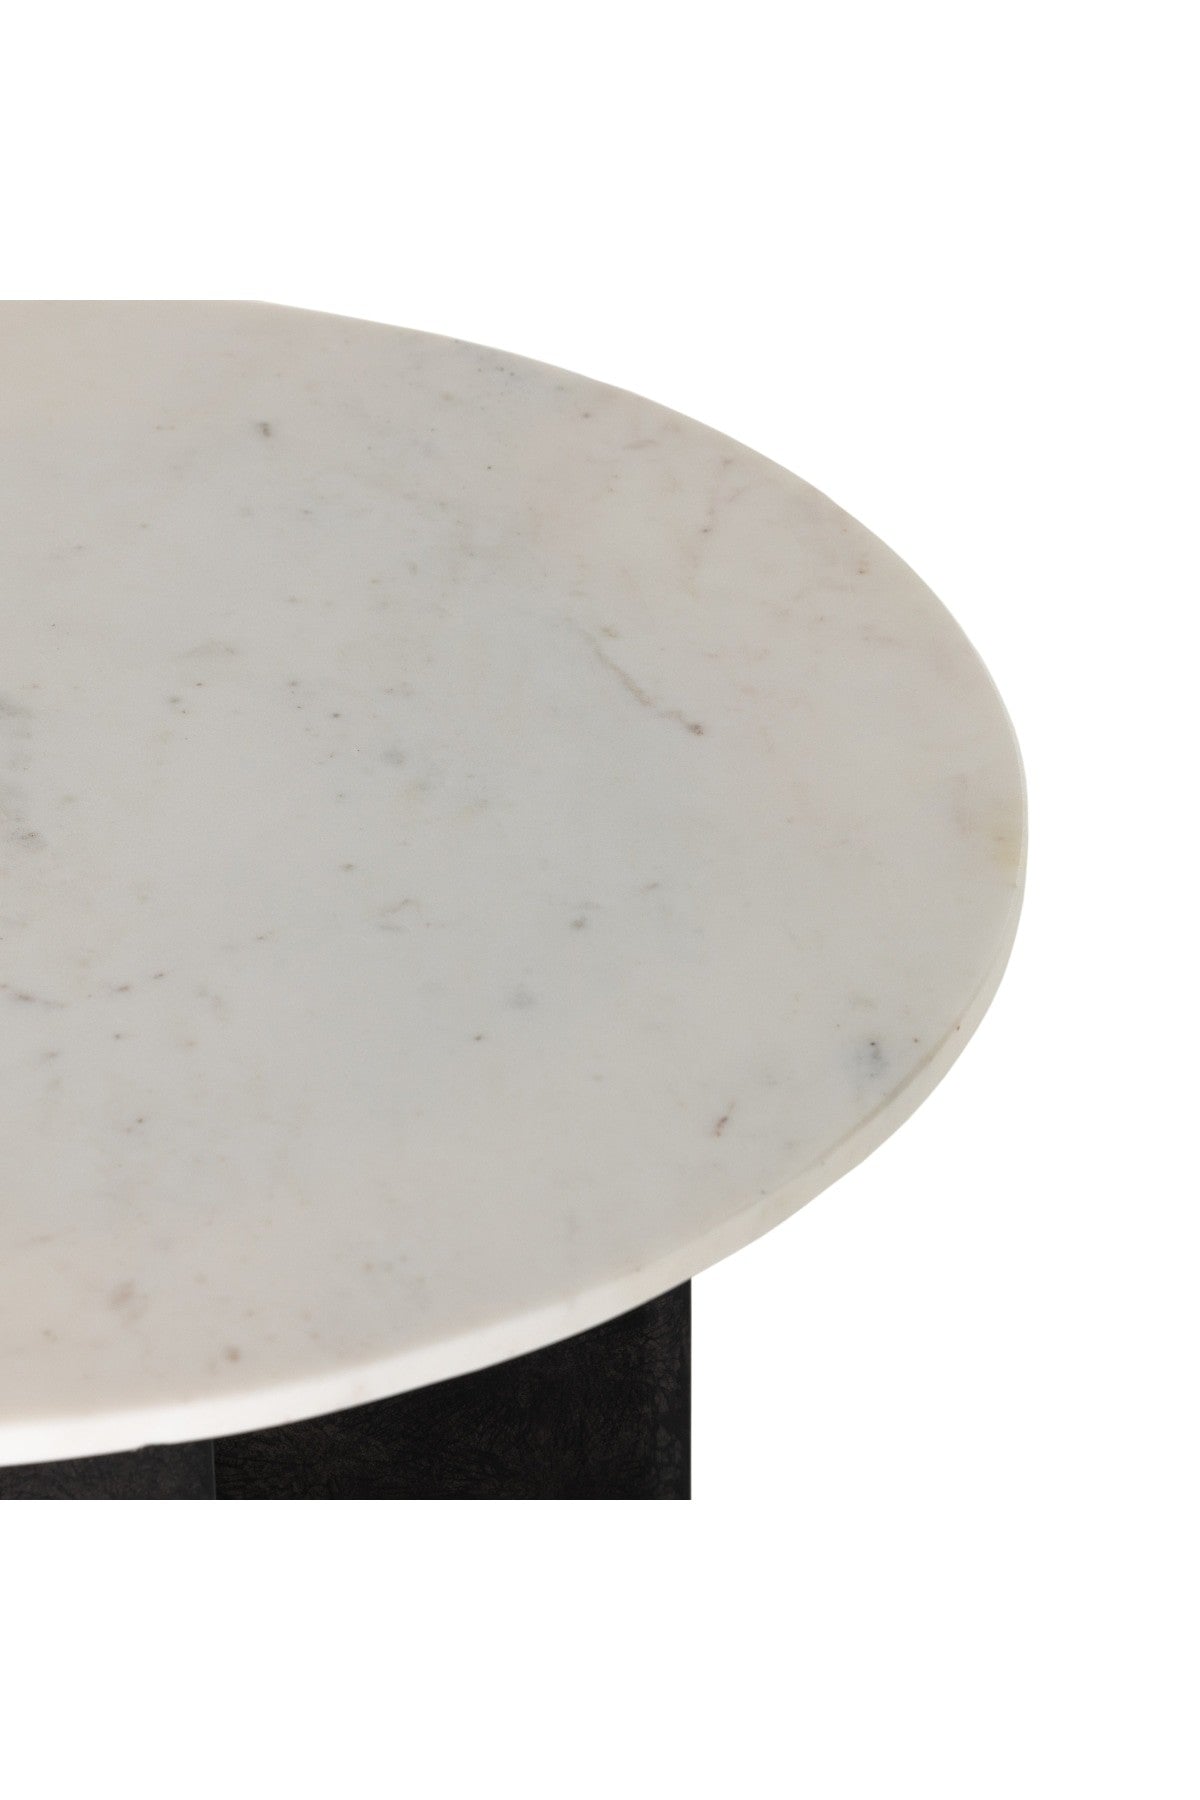 Crosley Round End Table - White Marble